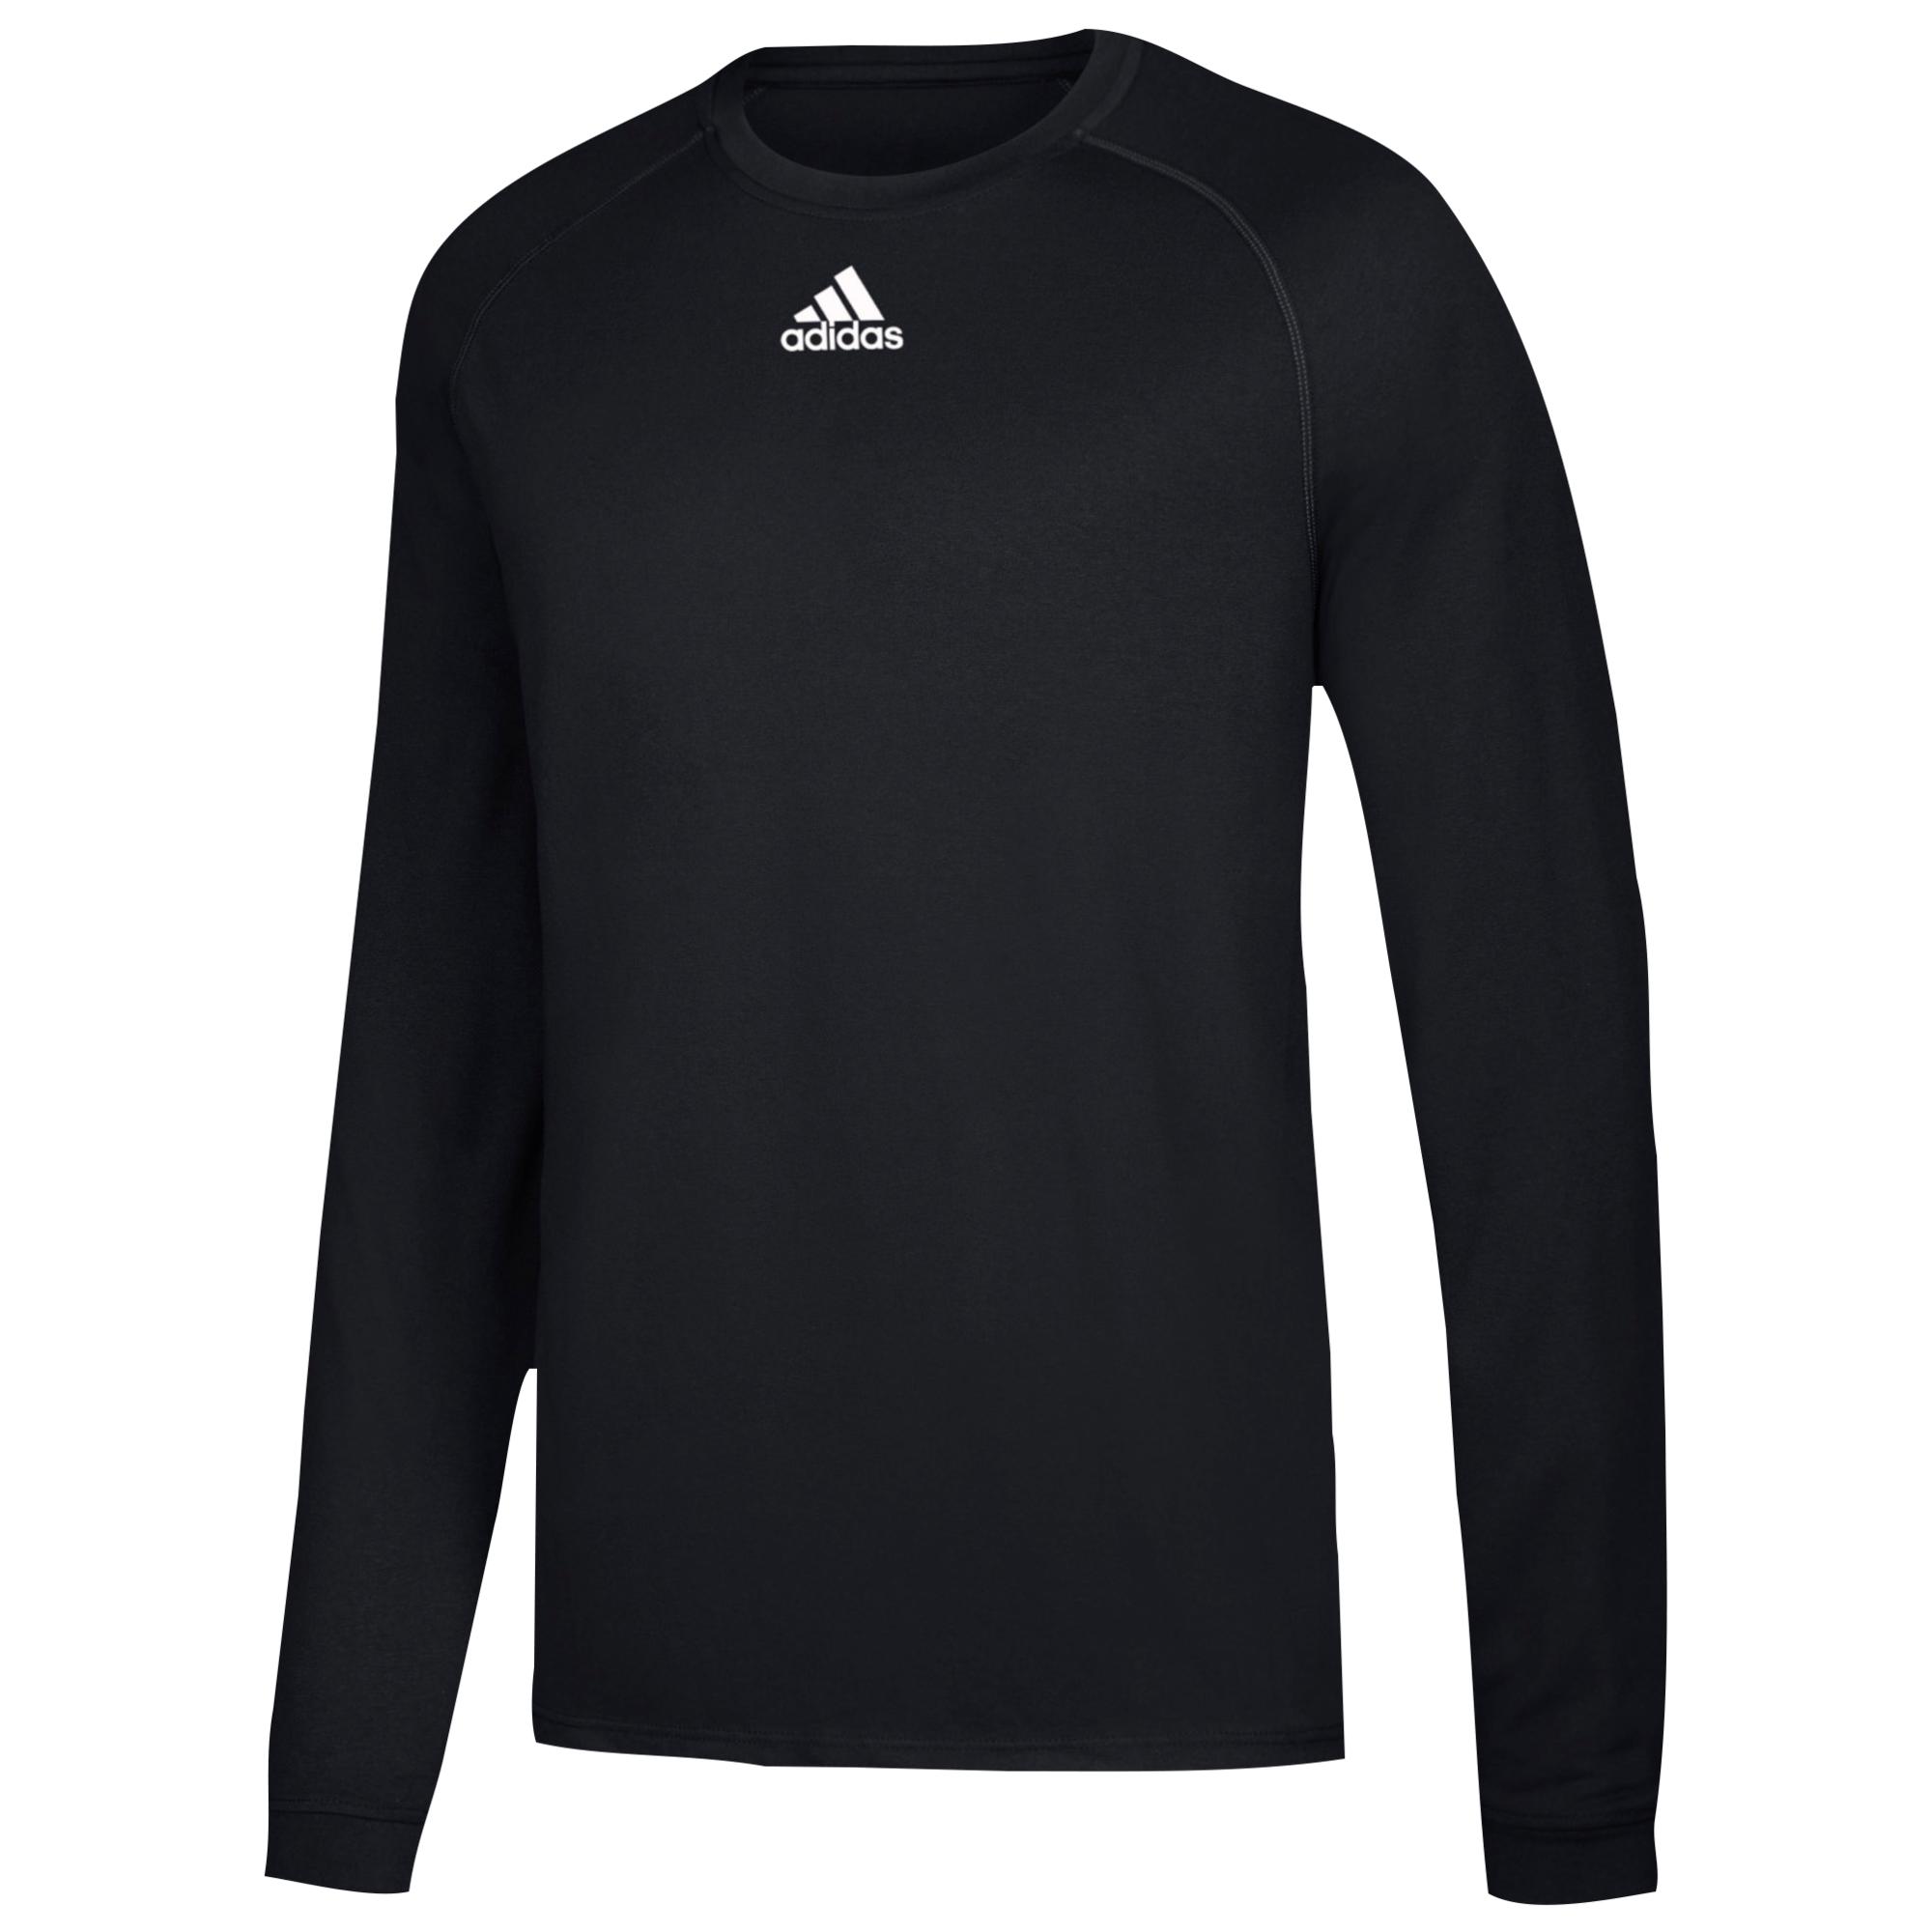 adidas Team Climalite Long Sleeve T-shirt in Black for Men - Lyst